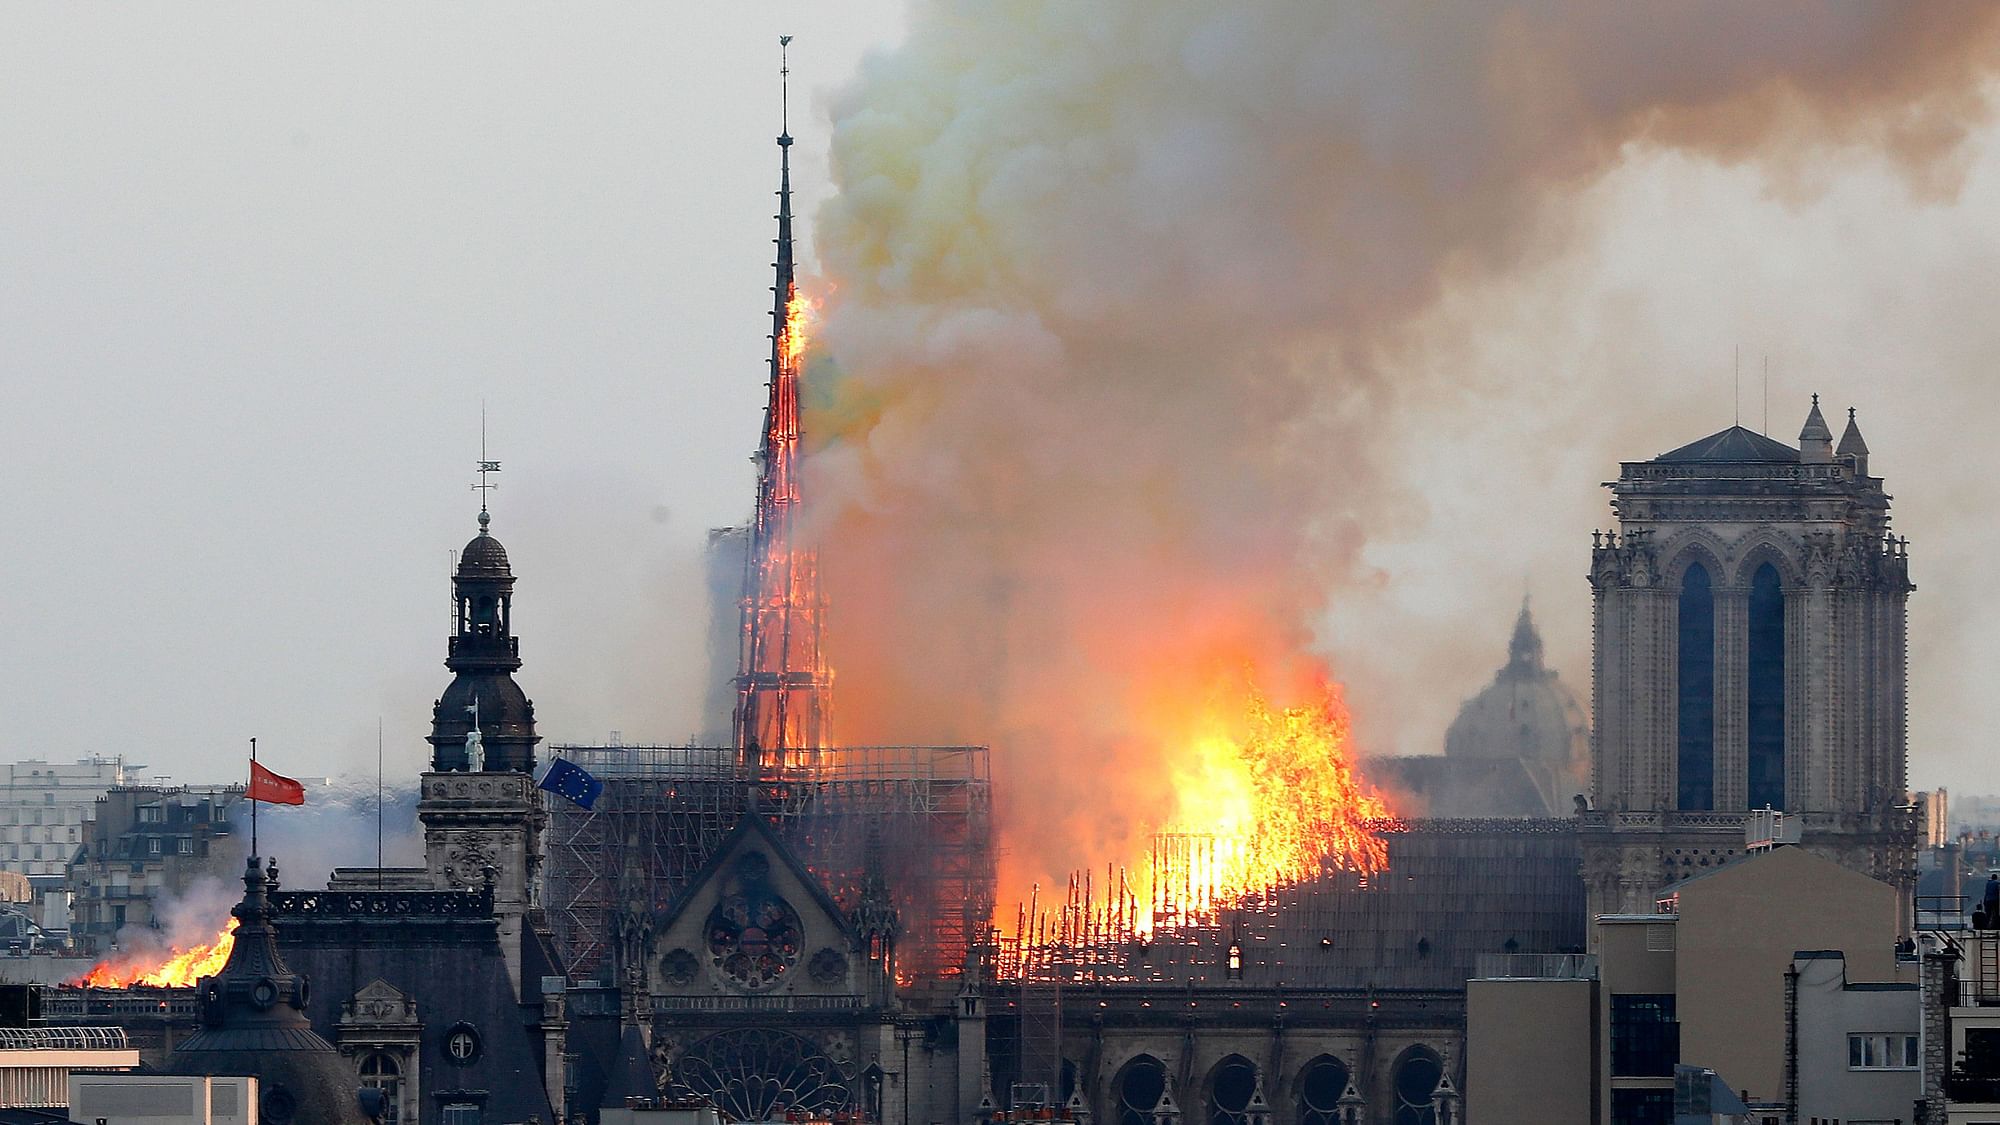 The fire caused the collapse of the cathedral’s iconic spire and destroyed its roof structure